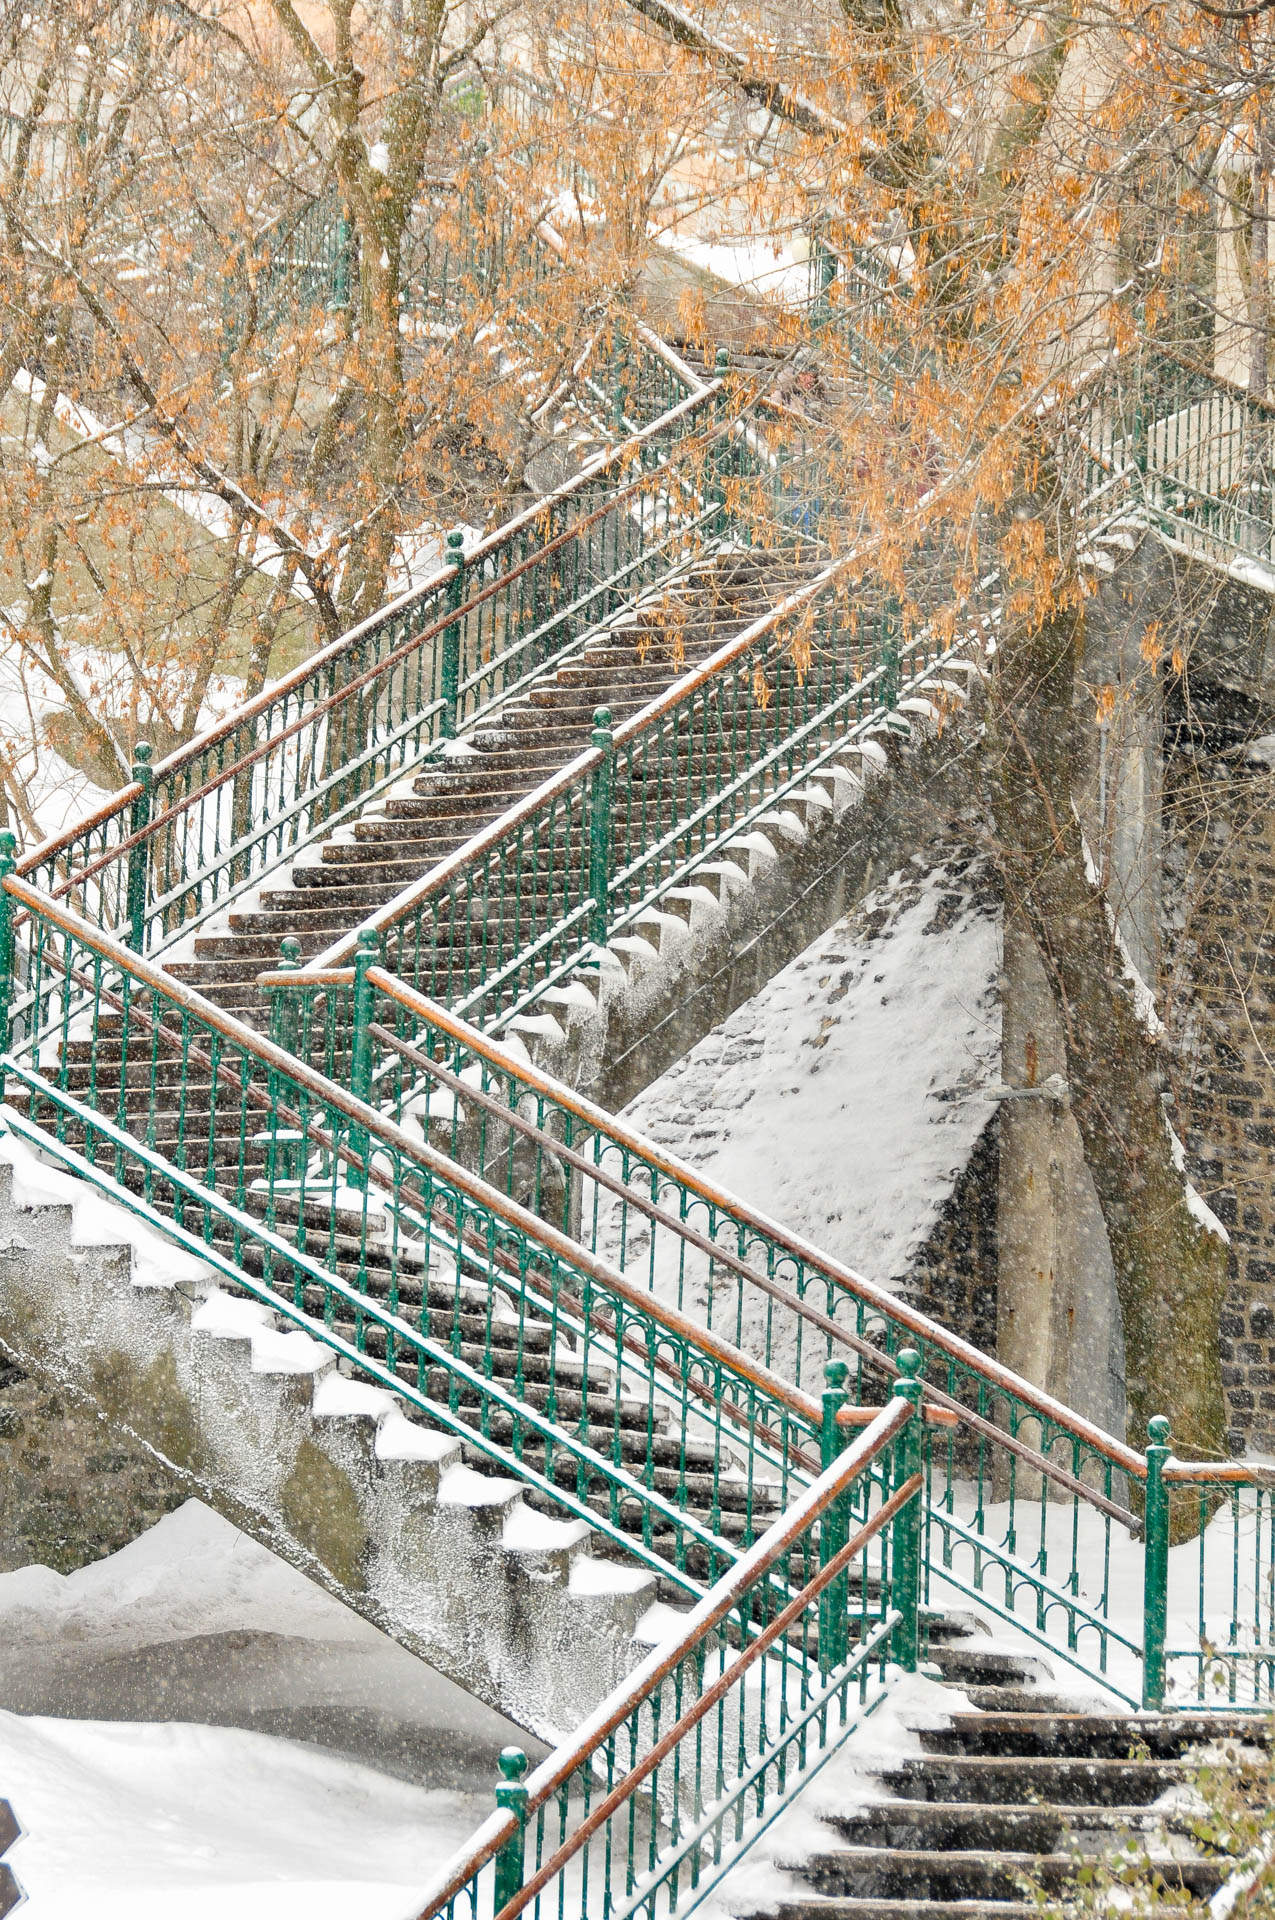 Staircase connecting Lower Town to Upper Town of Vieux-Quebec